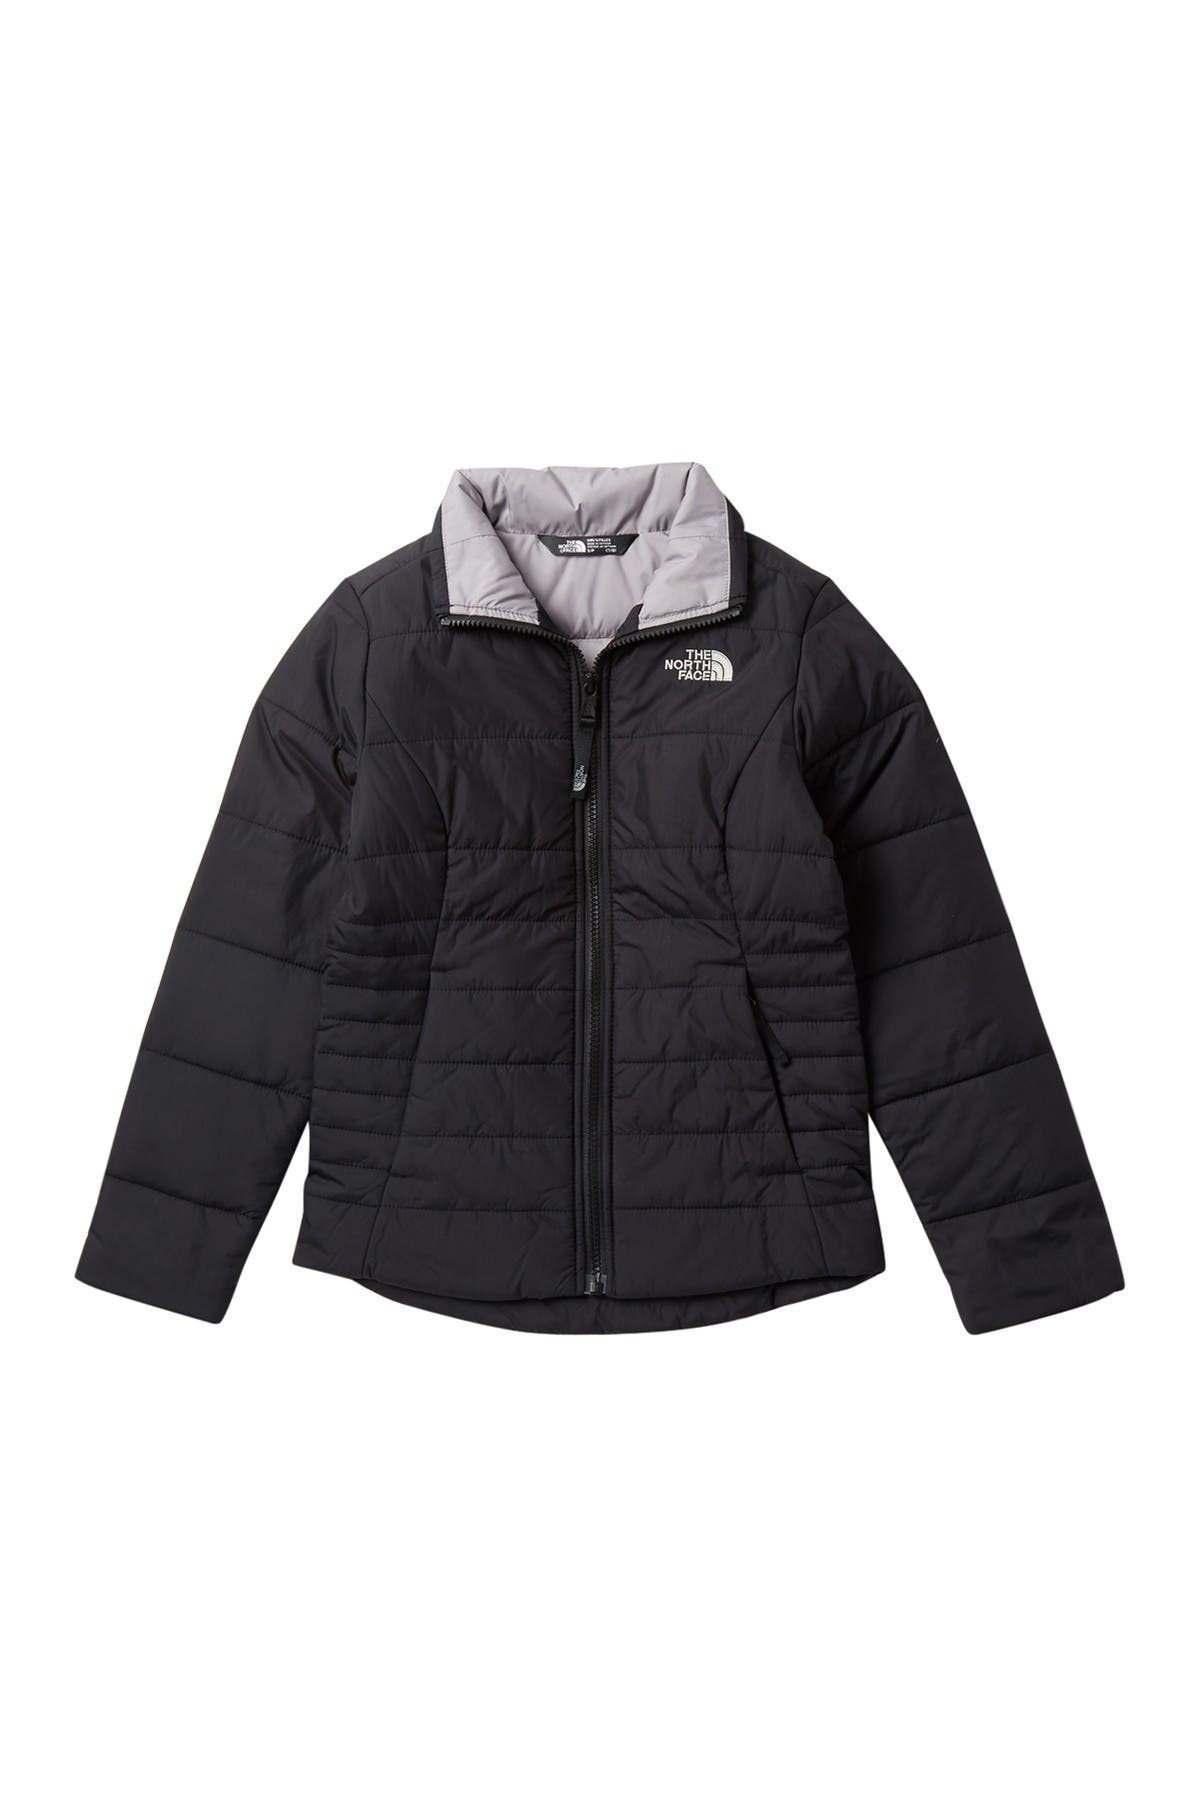 the north face womens harway jacket